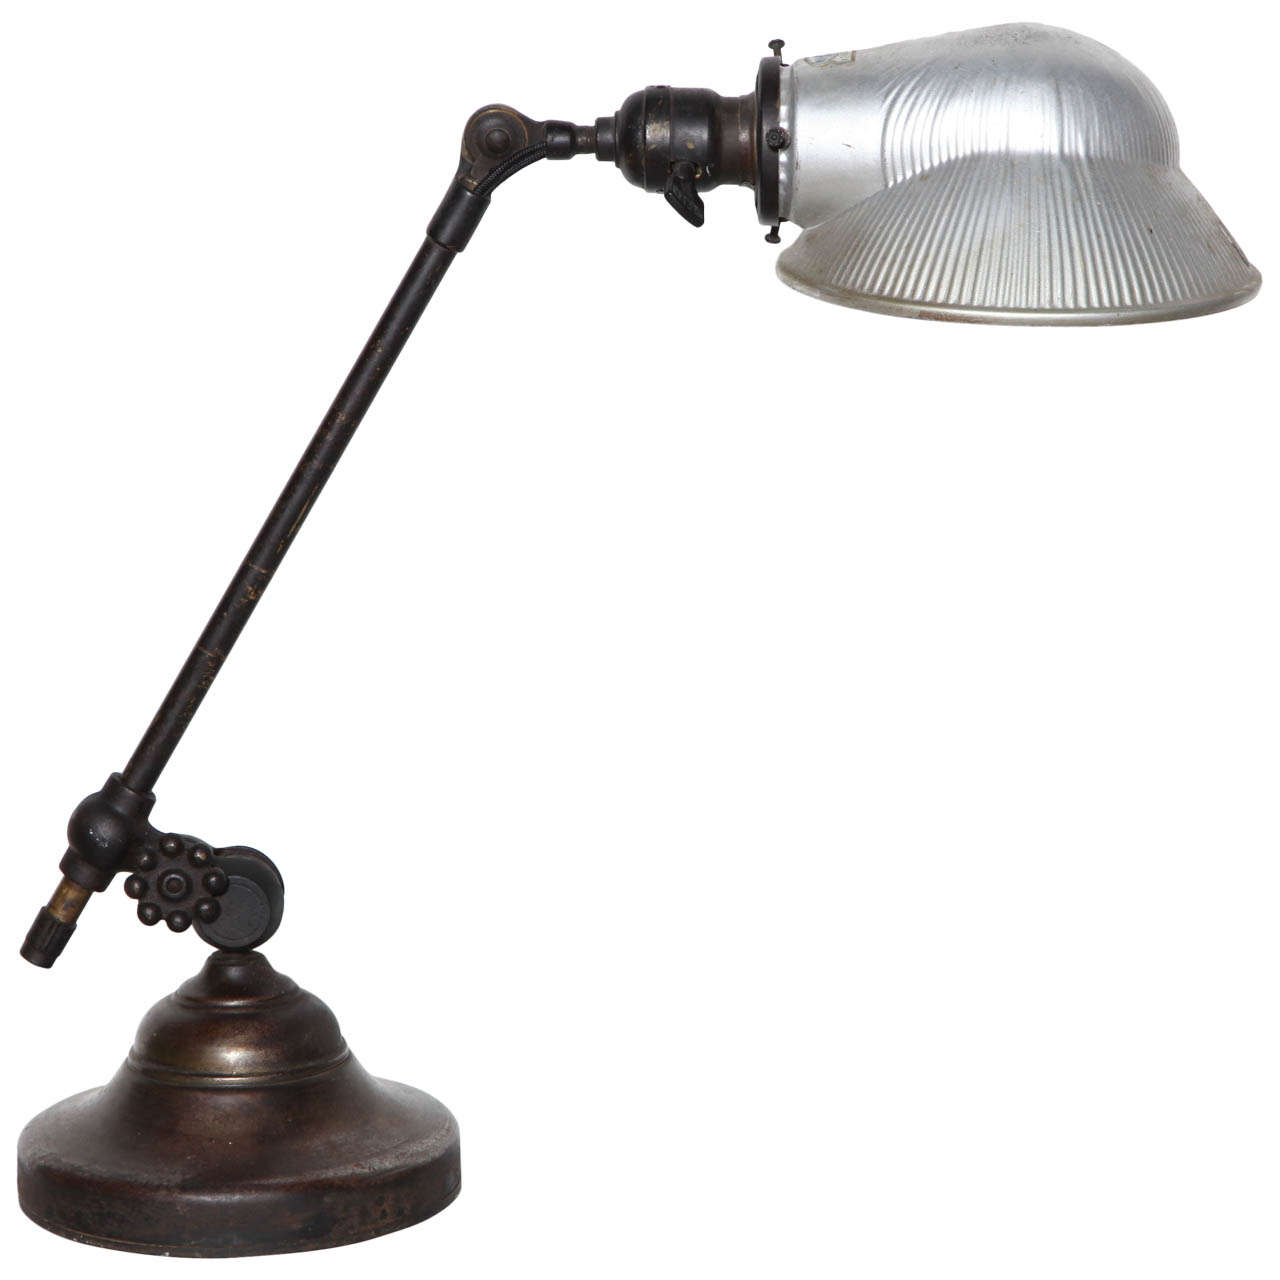 O. C. White Brass & Iron Adjustable Table Lamp with Mercury Glass Shade, C. 1900